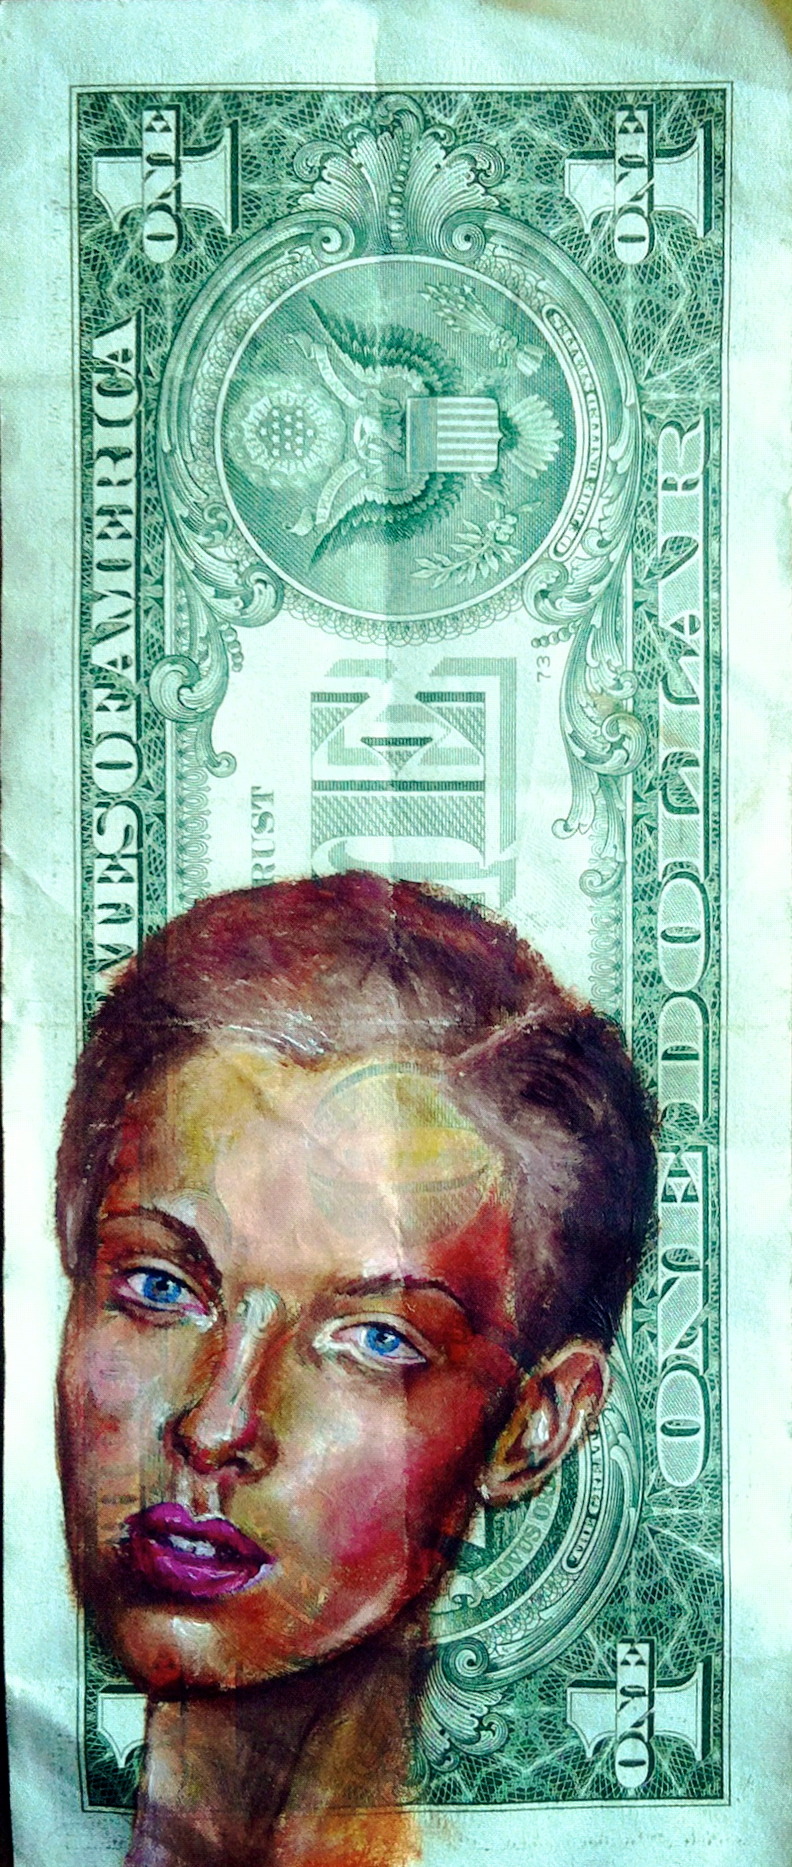 more currency art at my art blog: amy mcdonald